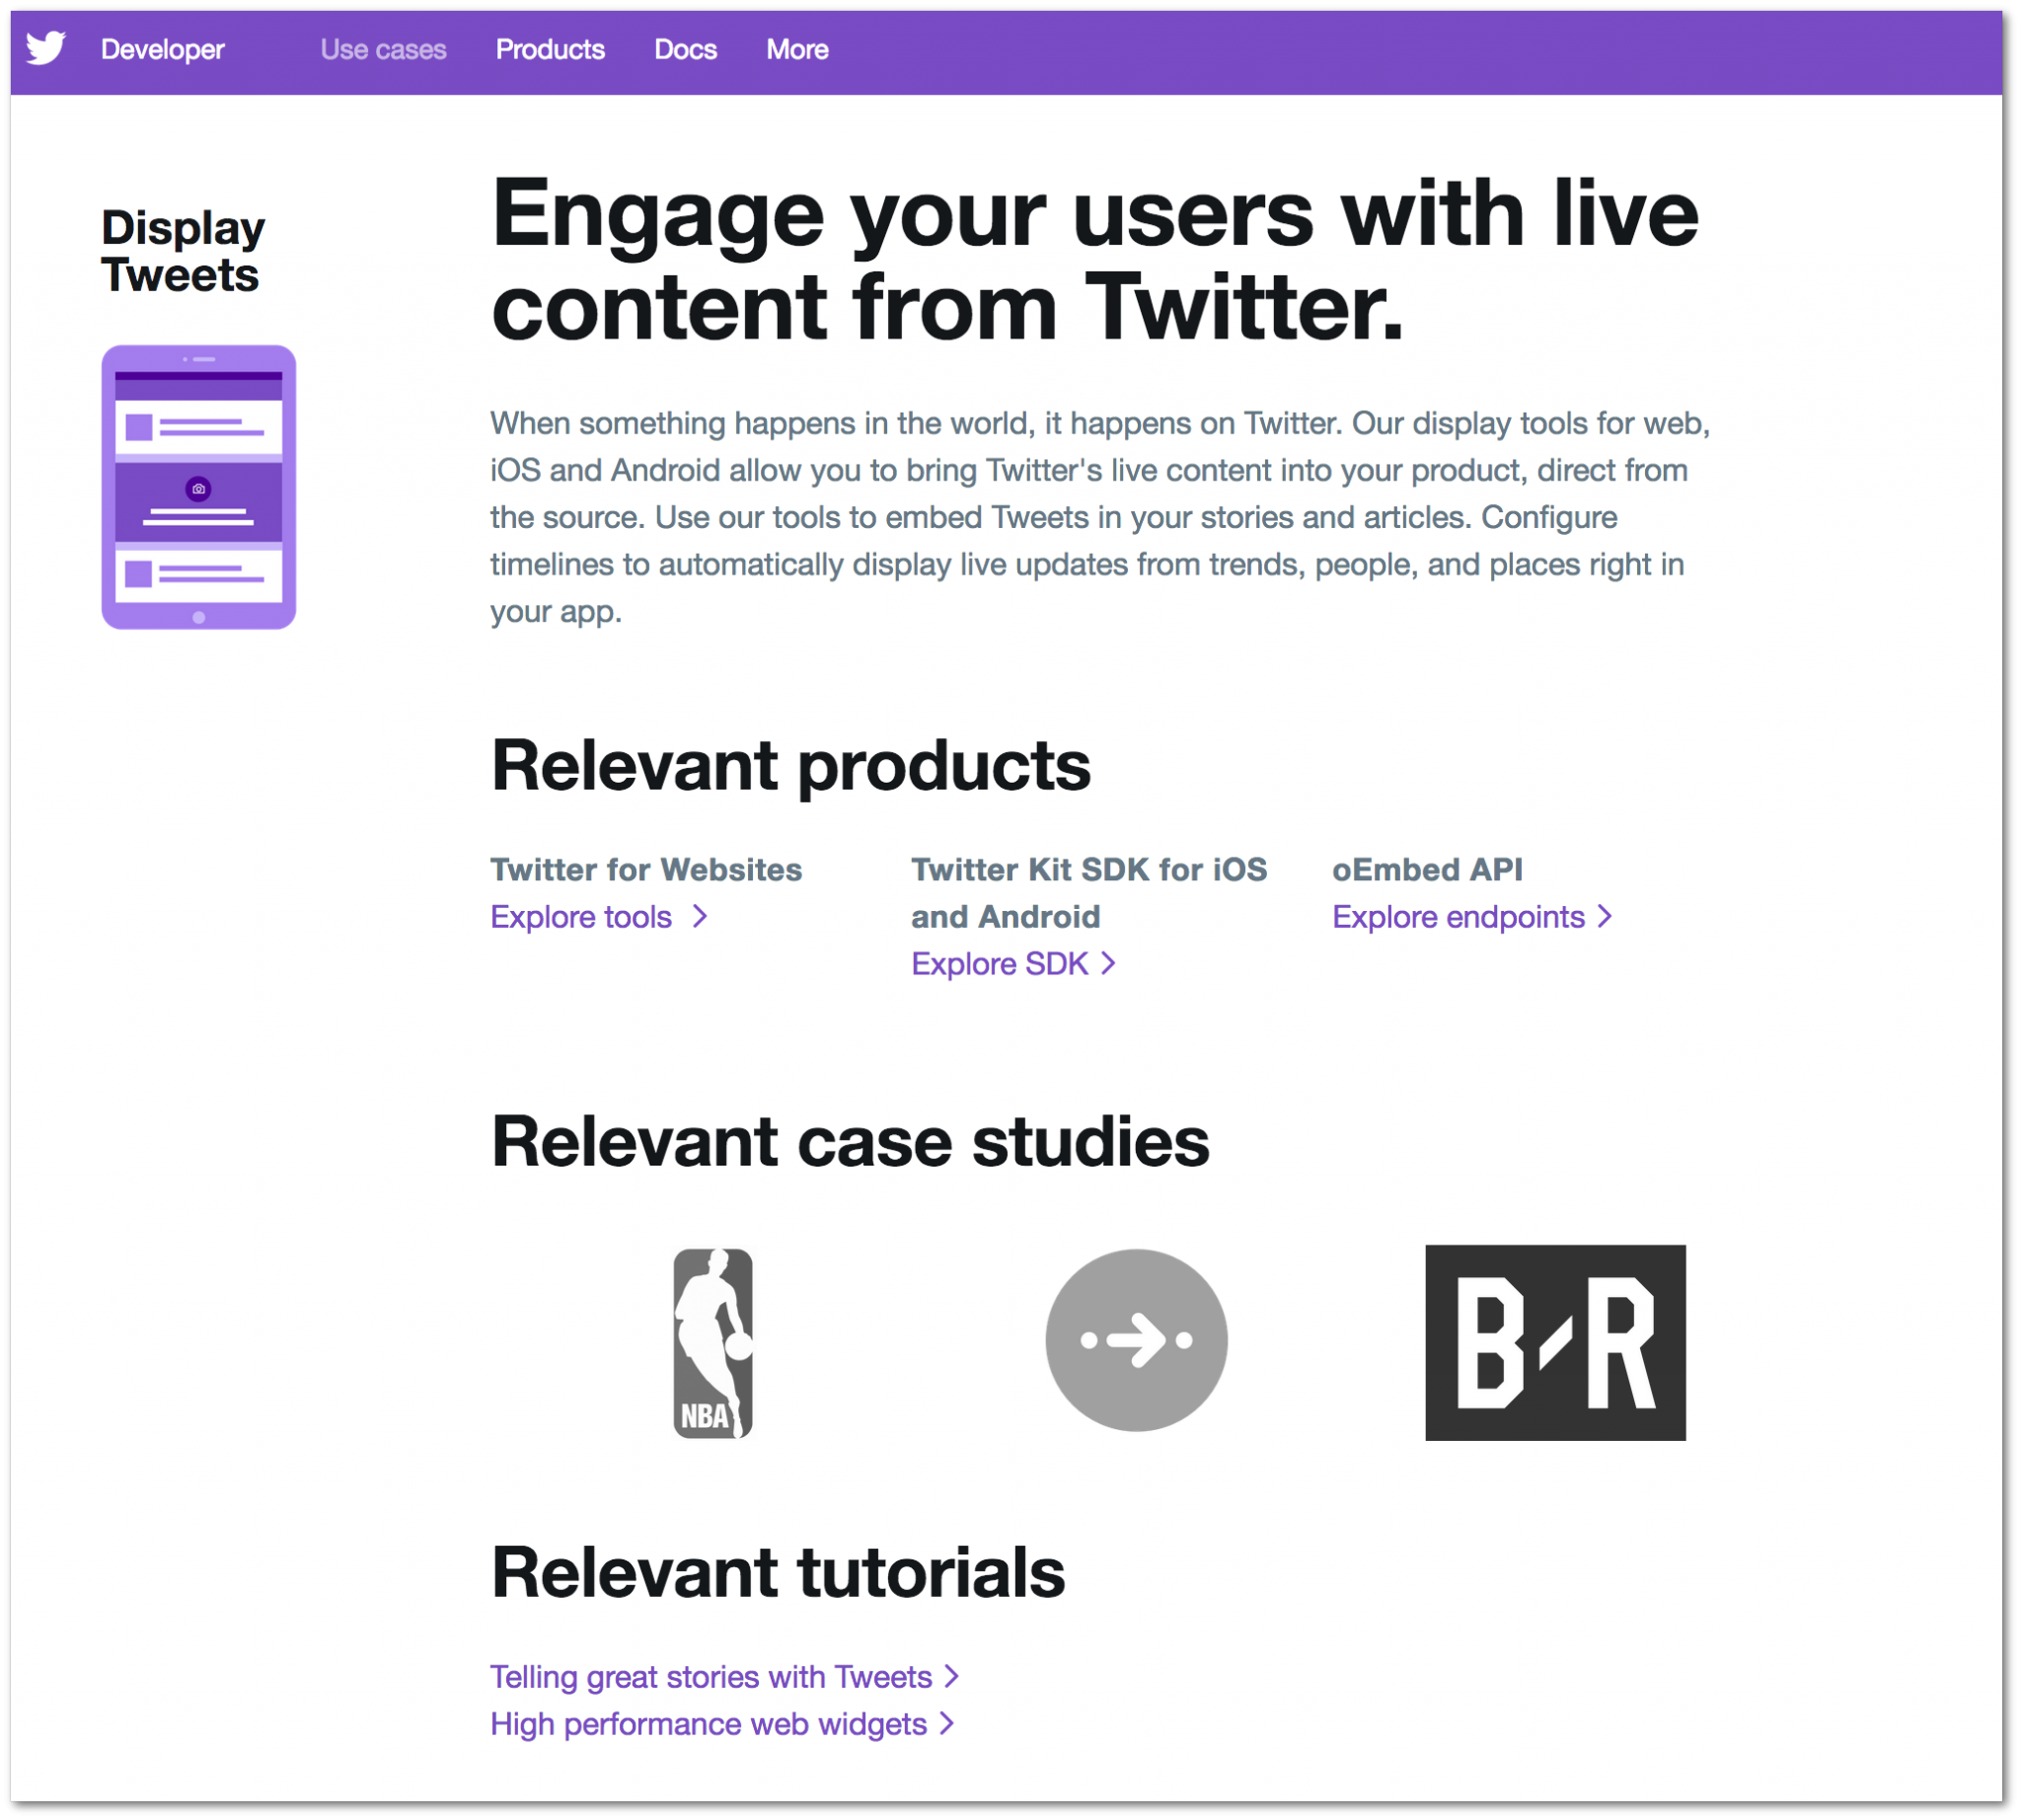 Twitter use cases on the developer portal focus on solutions first and then list benefits, products, (customer oriented) case studies, tutorials and links to more detailed developer documentation sections.